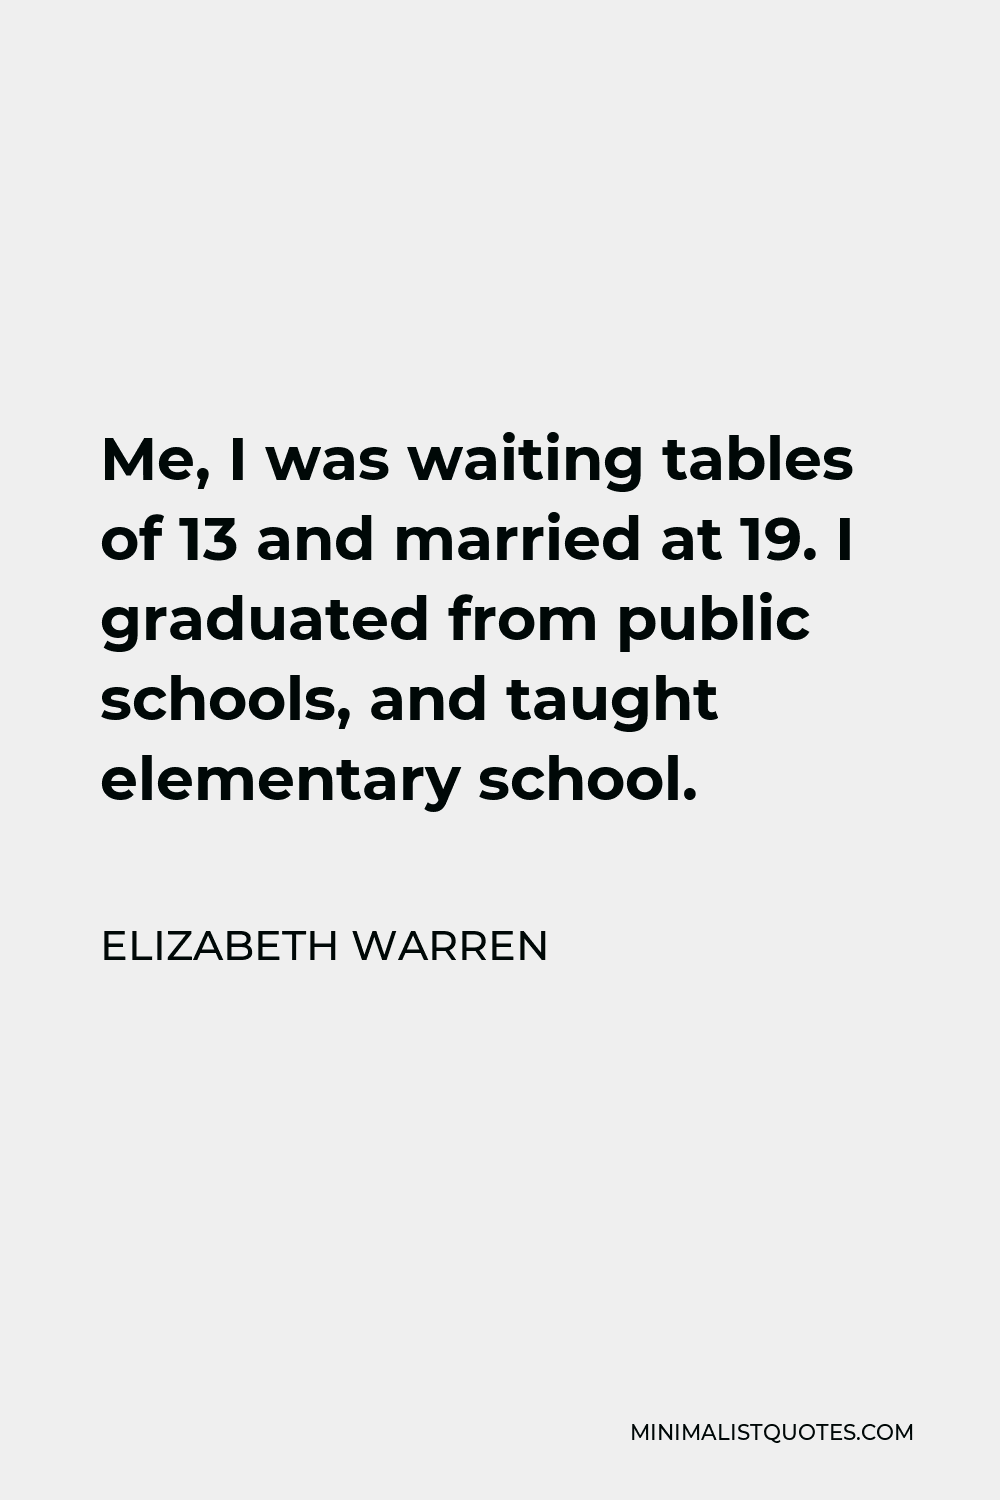 Elizabeth Warren Quote - Me, I was waiting tables of 13 and married at 19. I graduated from public schools, and taught elementary school.